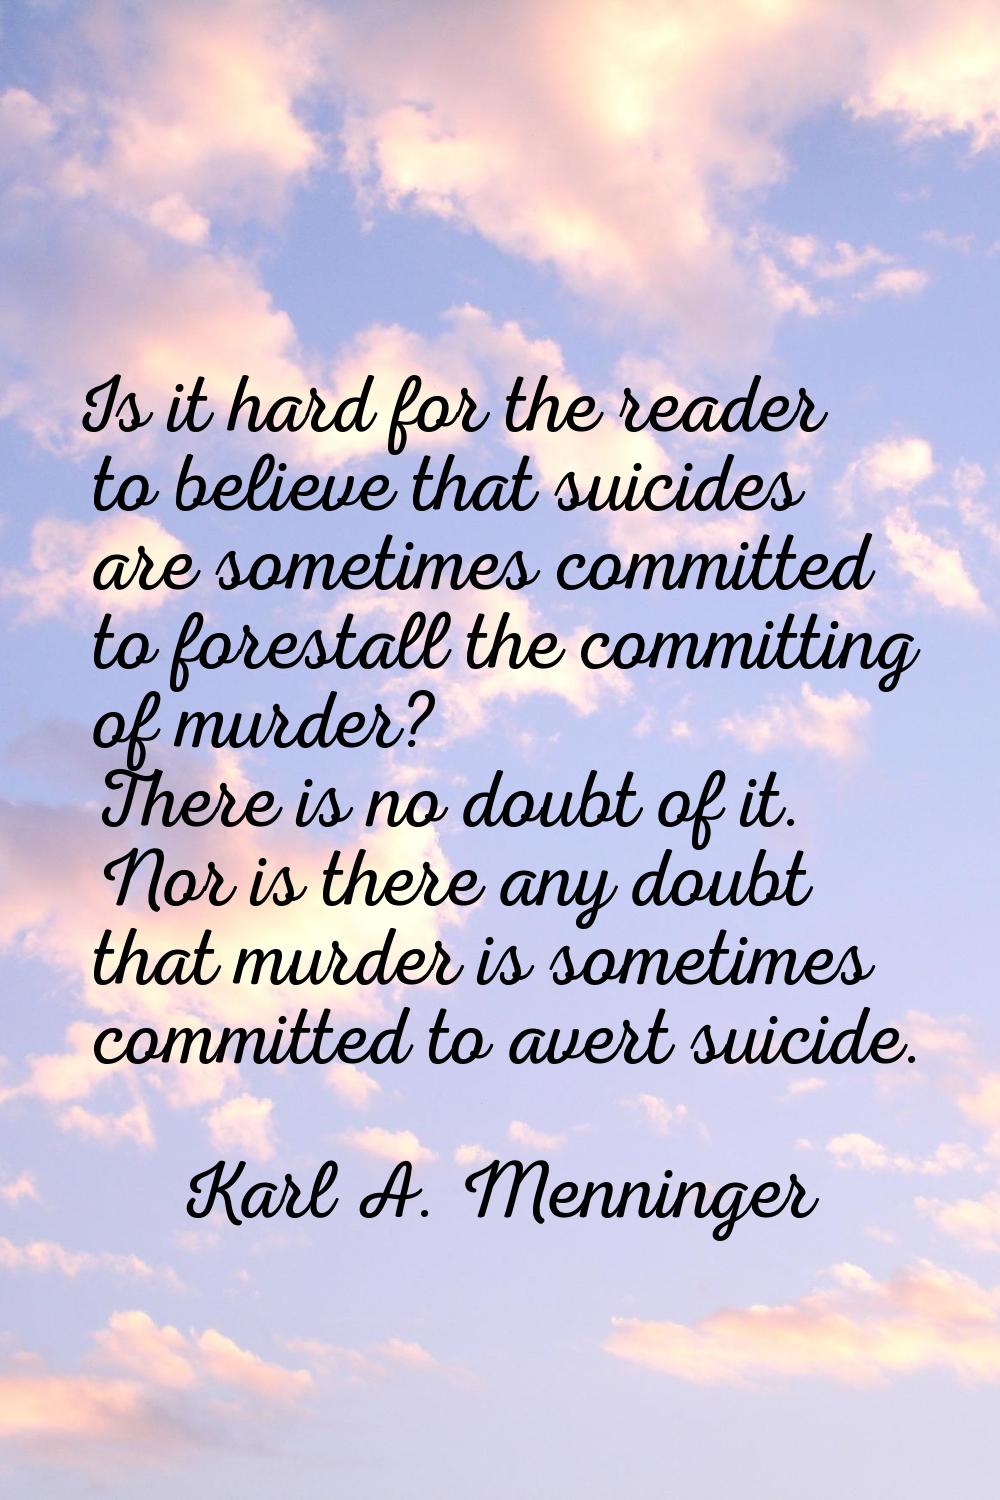 Is it hard for the reader to believe that suicides are sometimes committed to forestall the committ